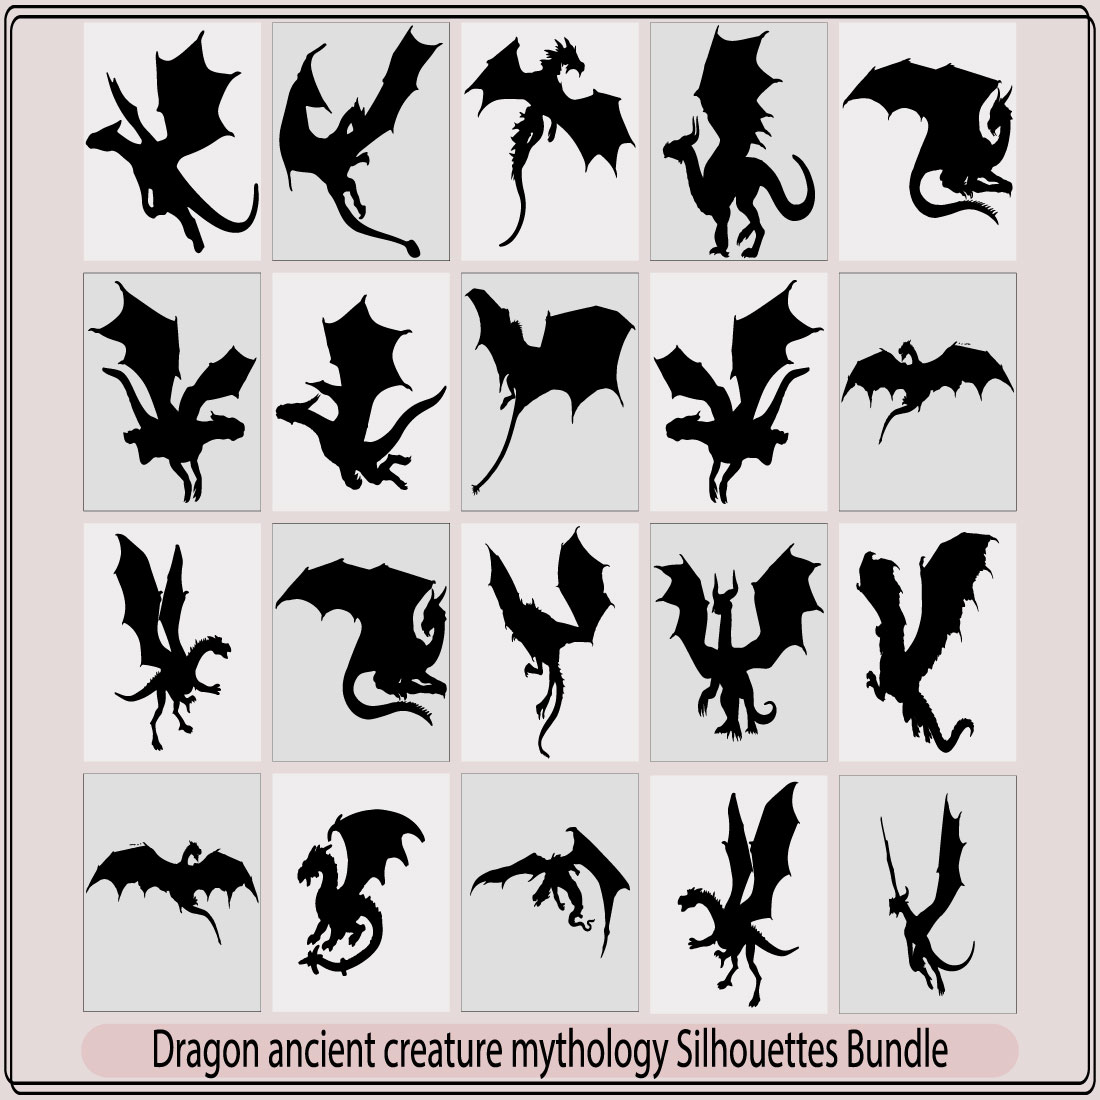 Dragon ancient creature mythology silhouette,dragon silhouettes on white background,Dragon Flying, Mythical Beast Illustration cover image.